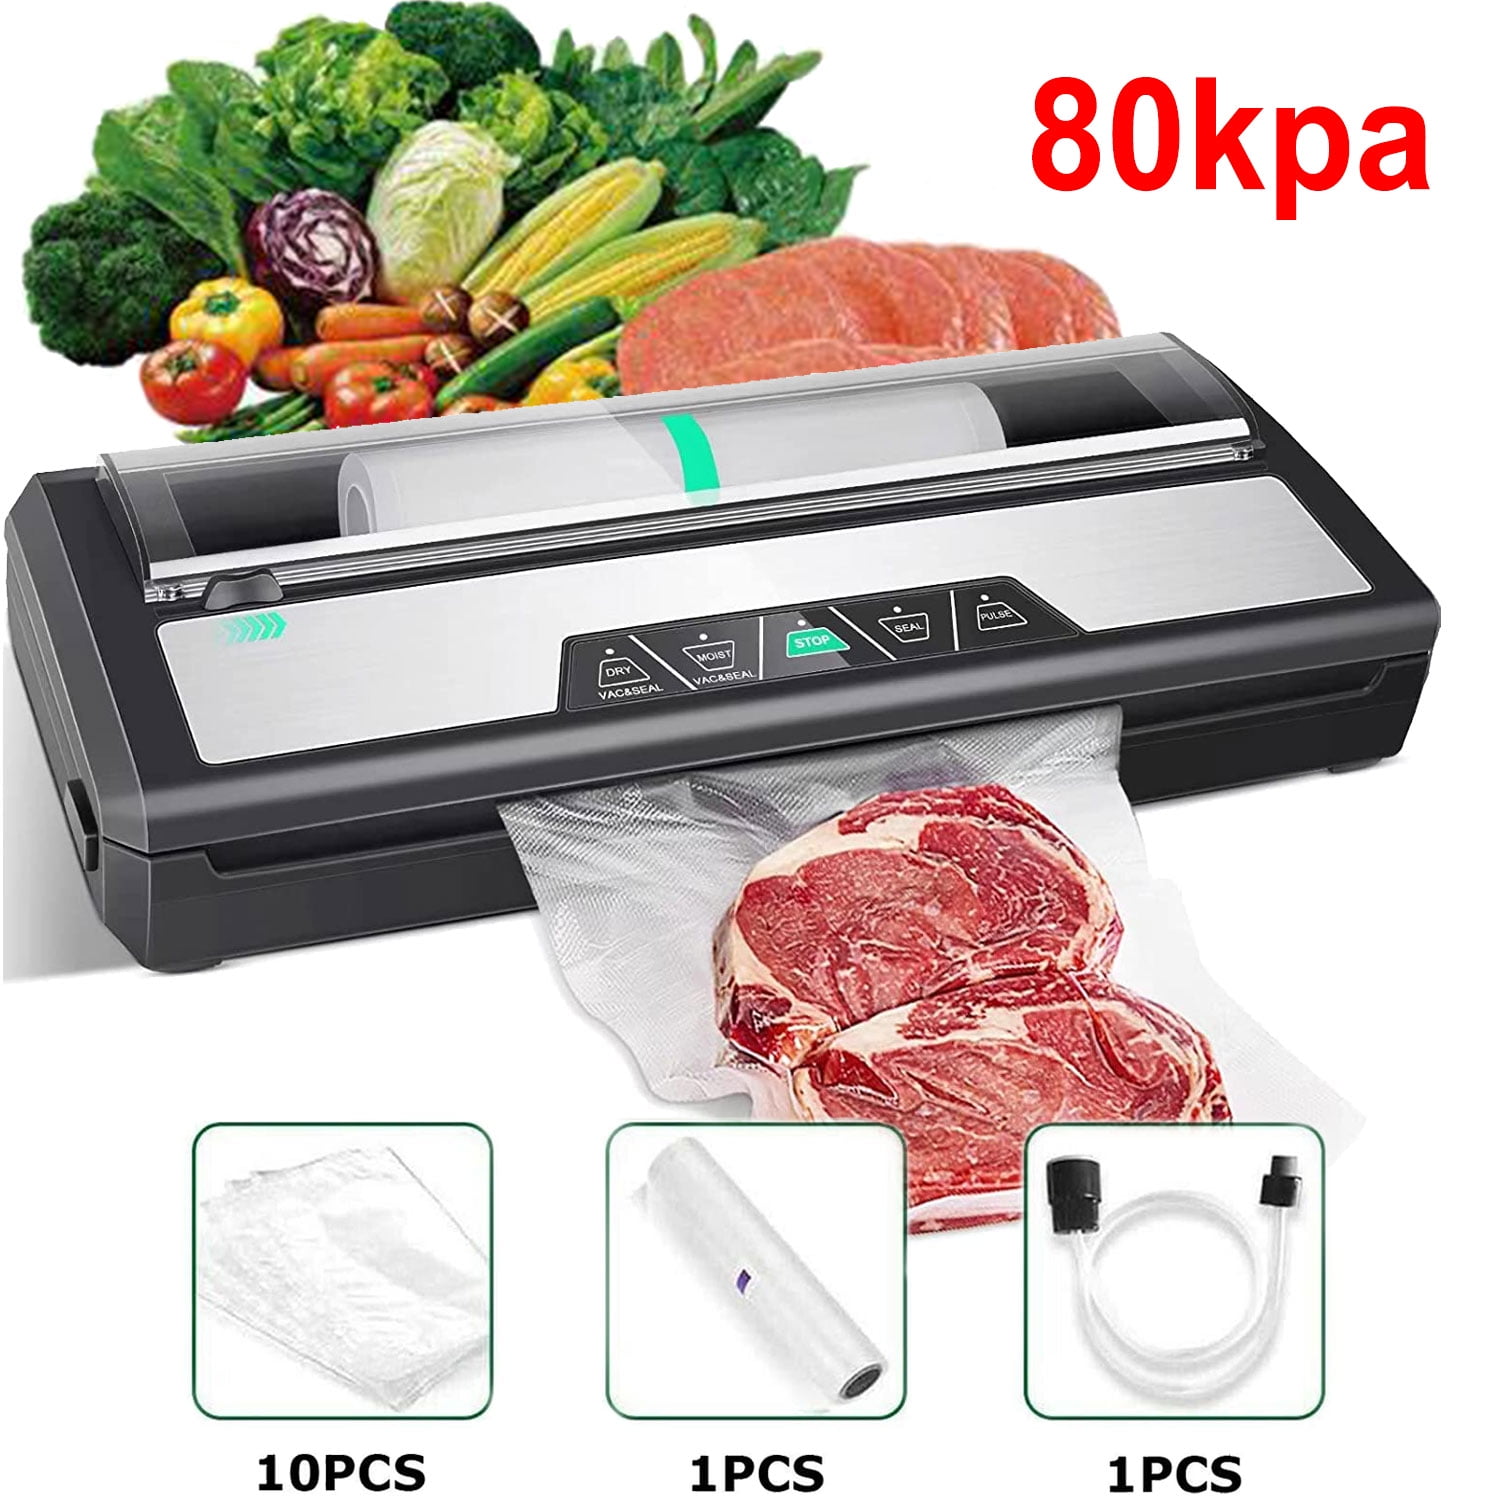 Vacuum Sealer Machine,Kitchen in the box Food Sealer Machine for Food  Storage,Dry/Wet/Seal/Vac/External Vac Modes & 5 Sealing  Temperatures,Automatic Air Sealer with 15Pcs Vacuum Seal Bags,Grey - Yahoo  Shopping